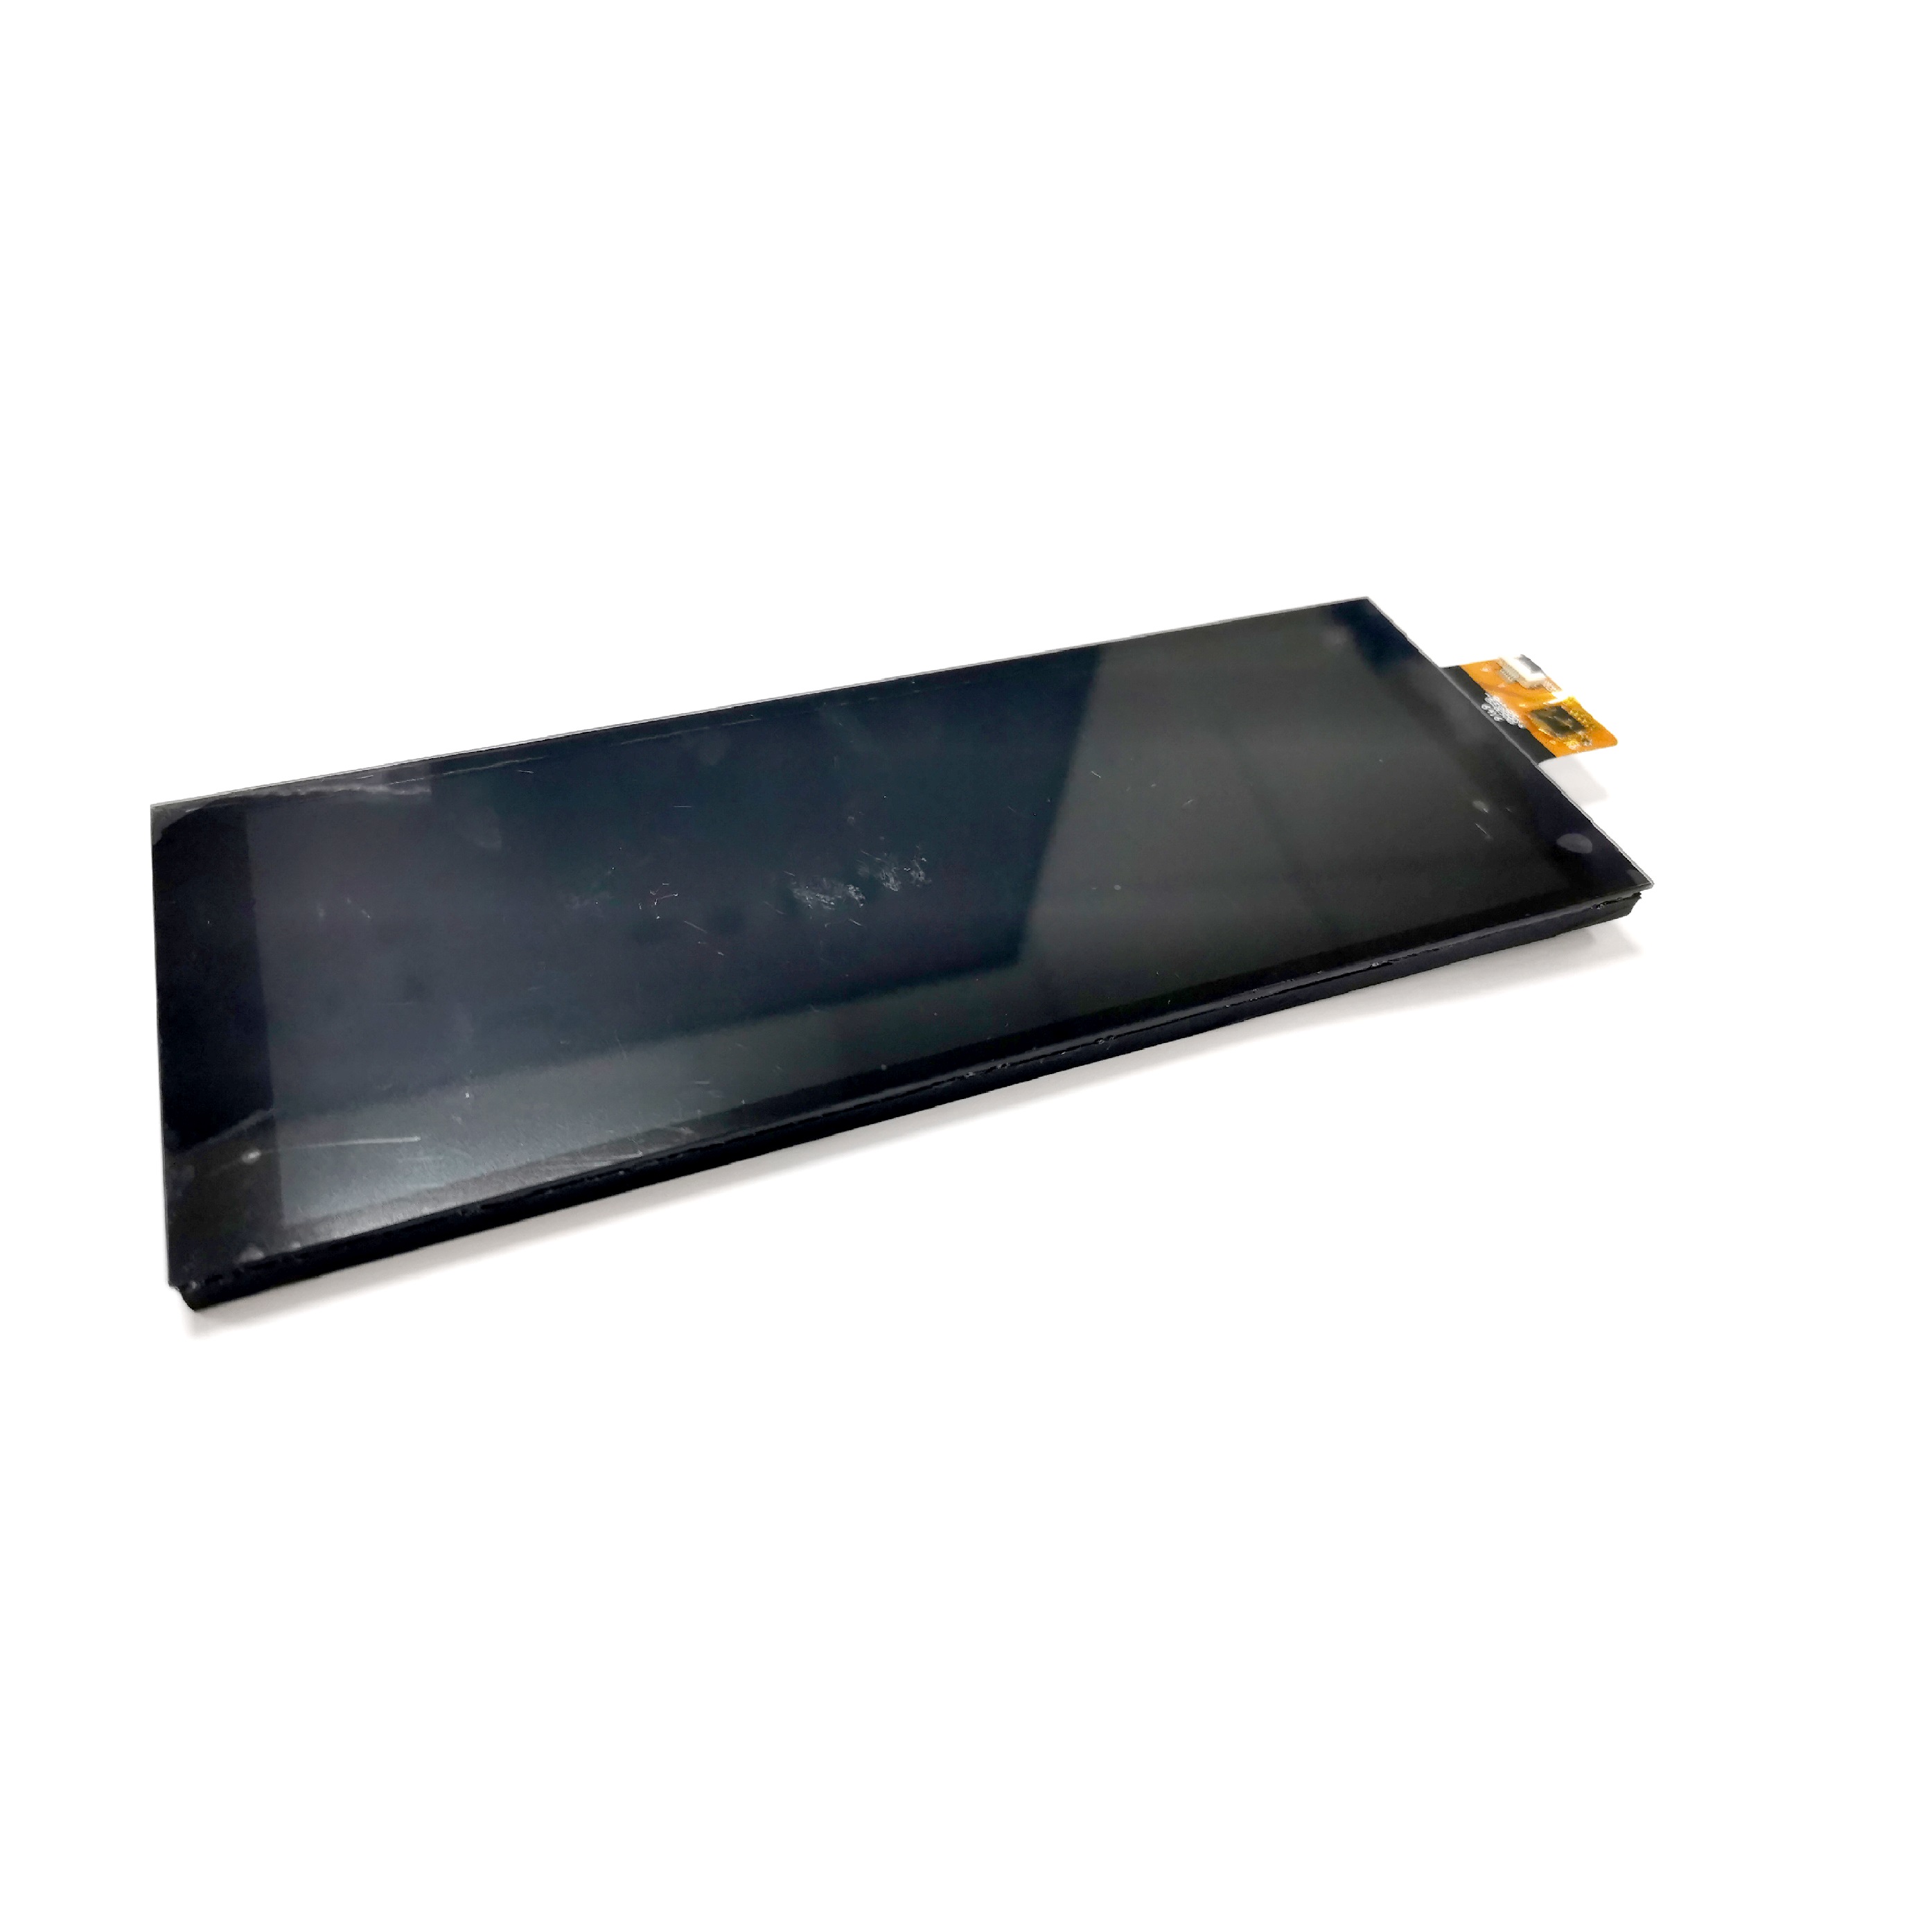 6.86 Inch 480*1280 pixel TFT LCD Display with Touch Panel MIPI Interface all Viewing for 3D Printer